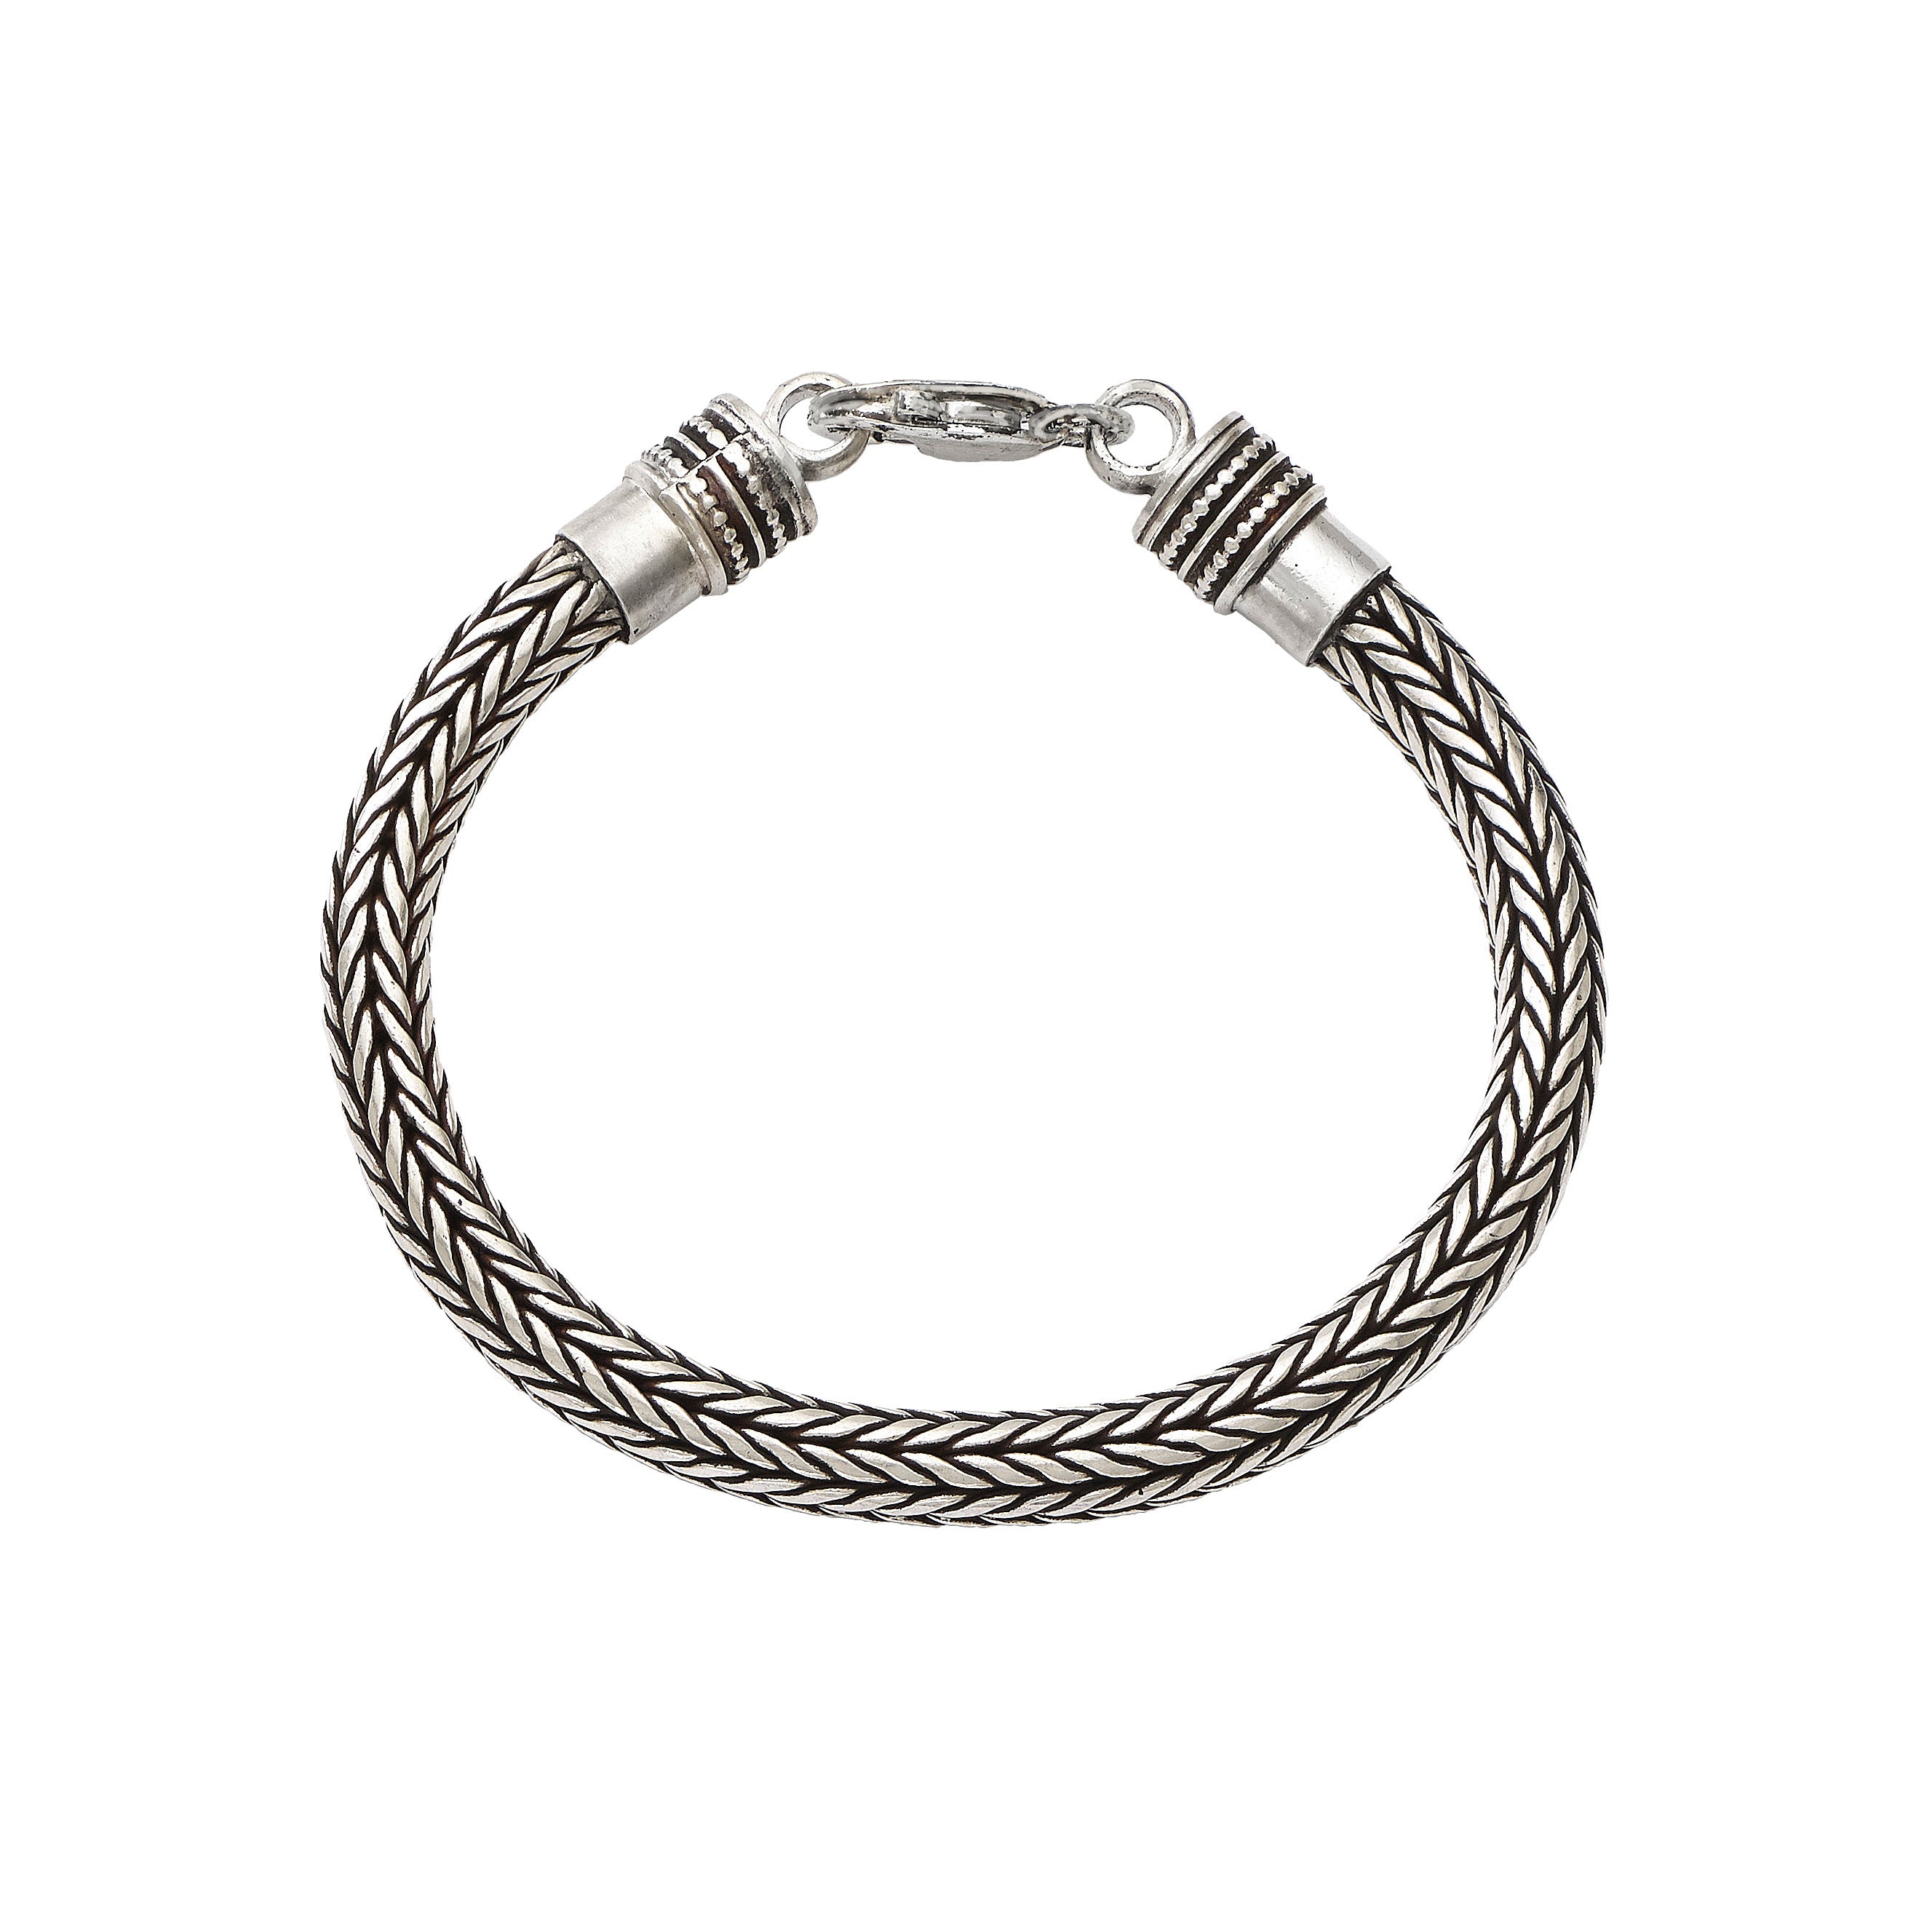 Rounded Silver Foxtail Chain Bracelet